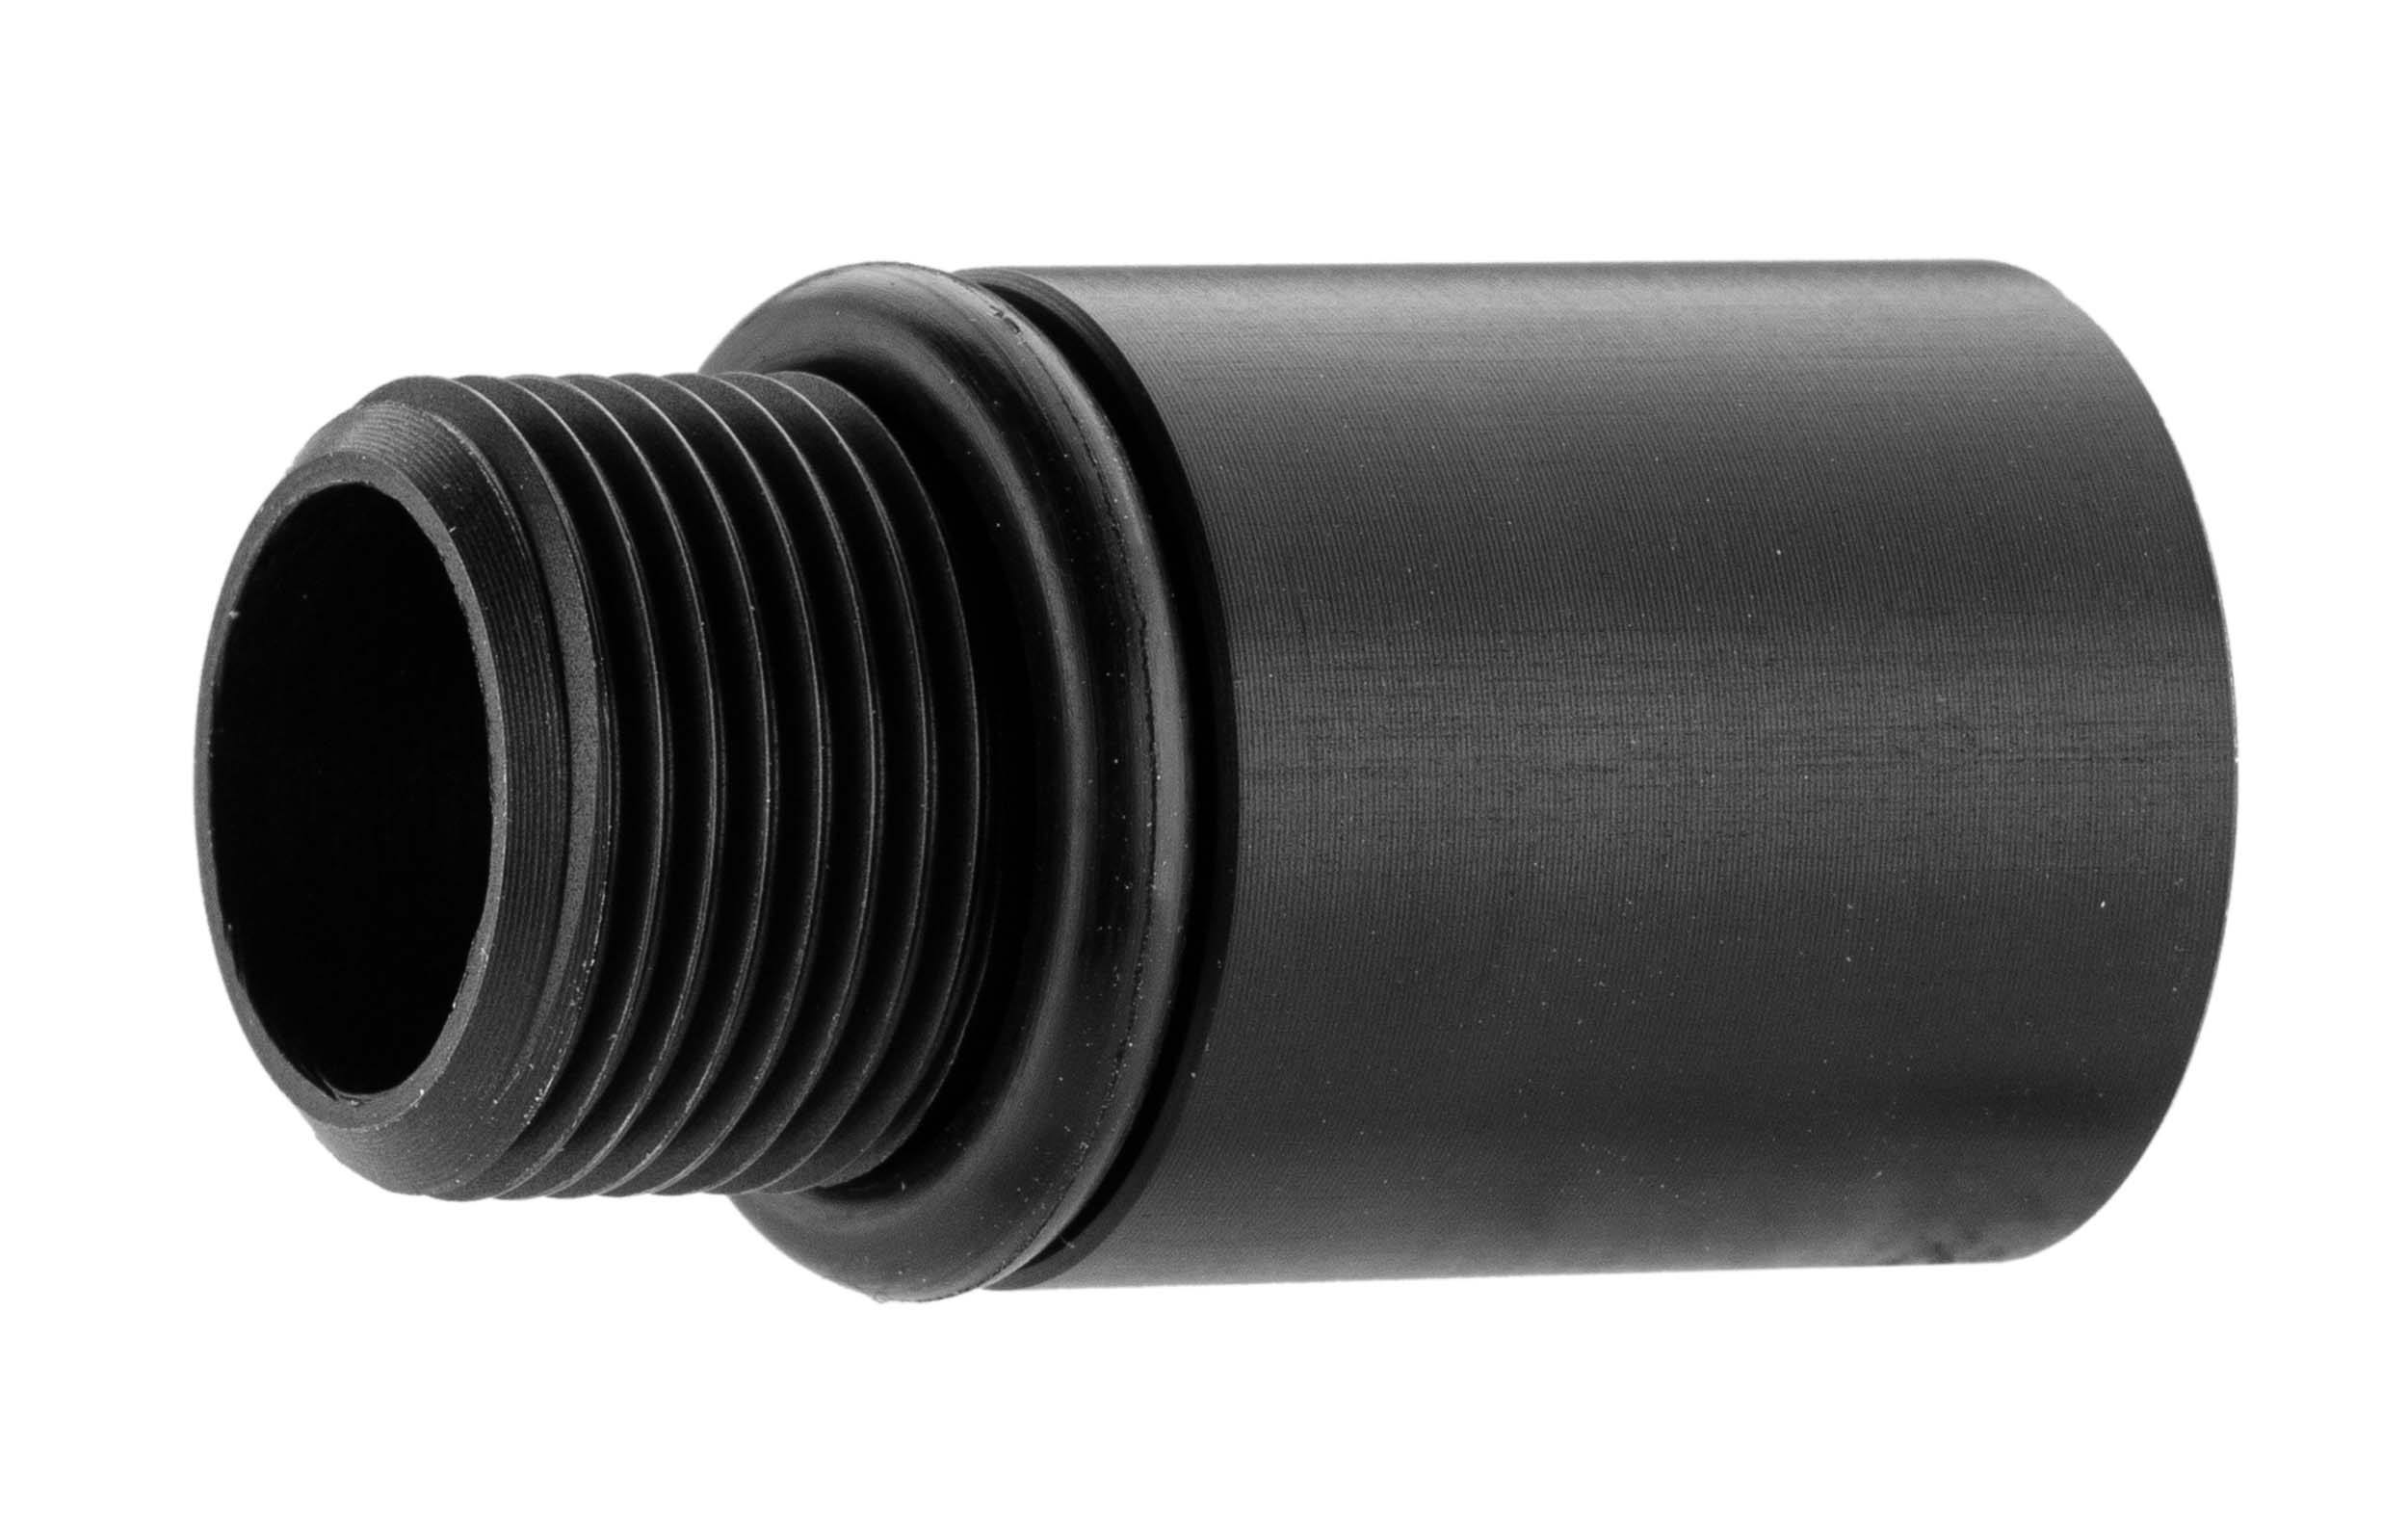 Adaptateur silencieux 12mm+ femelle vers 14mm- male GTP9 - BO Manufacture